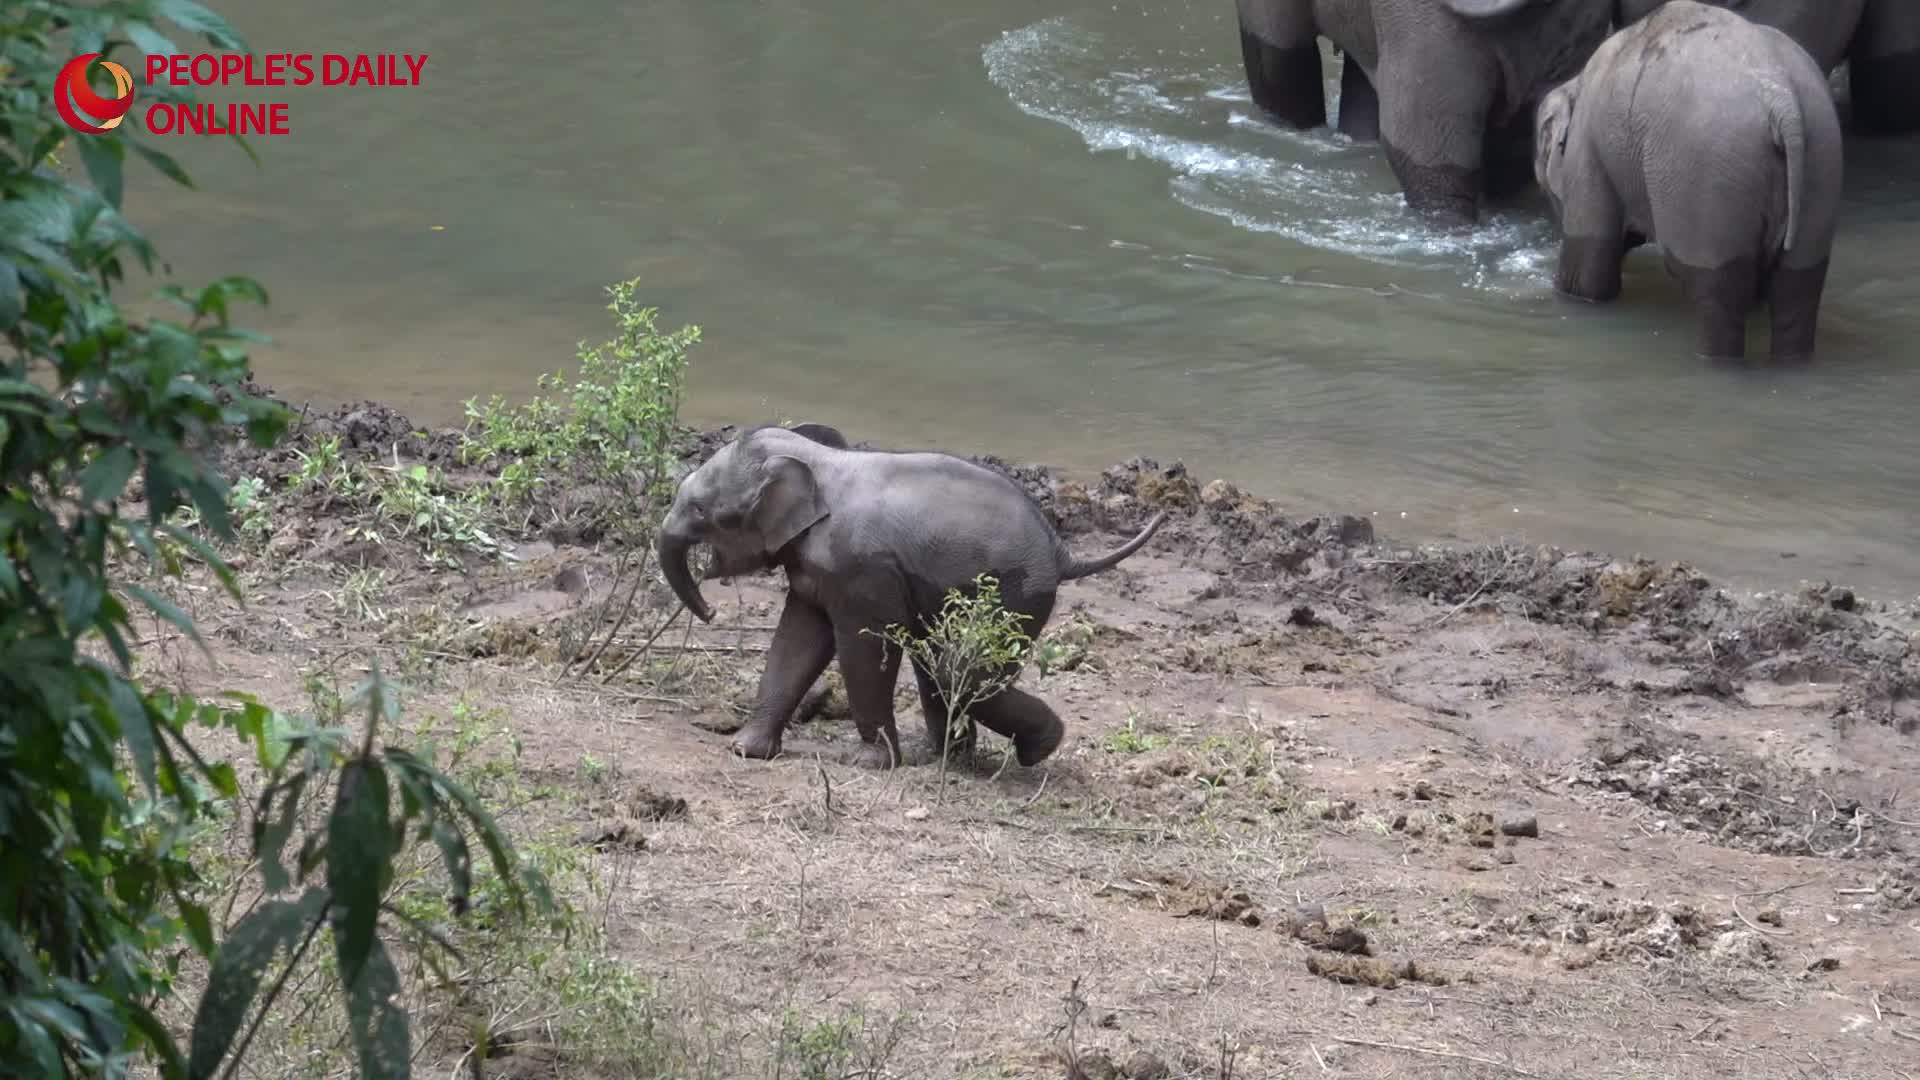 Stubbornly playful! Young elephant's refusal to join herd in water frustrates elder